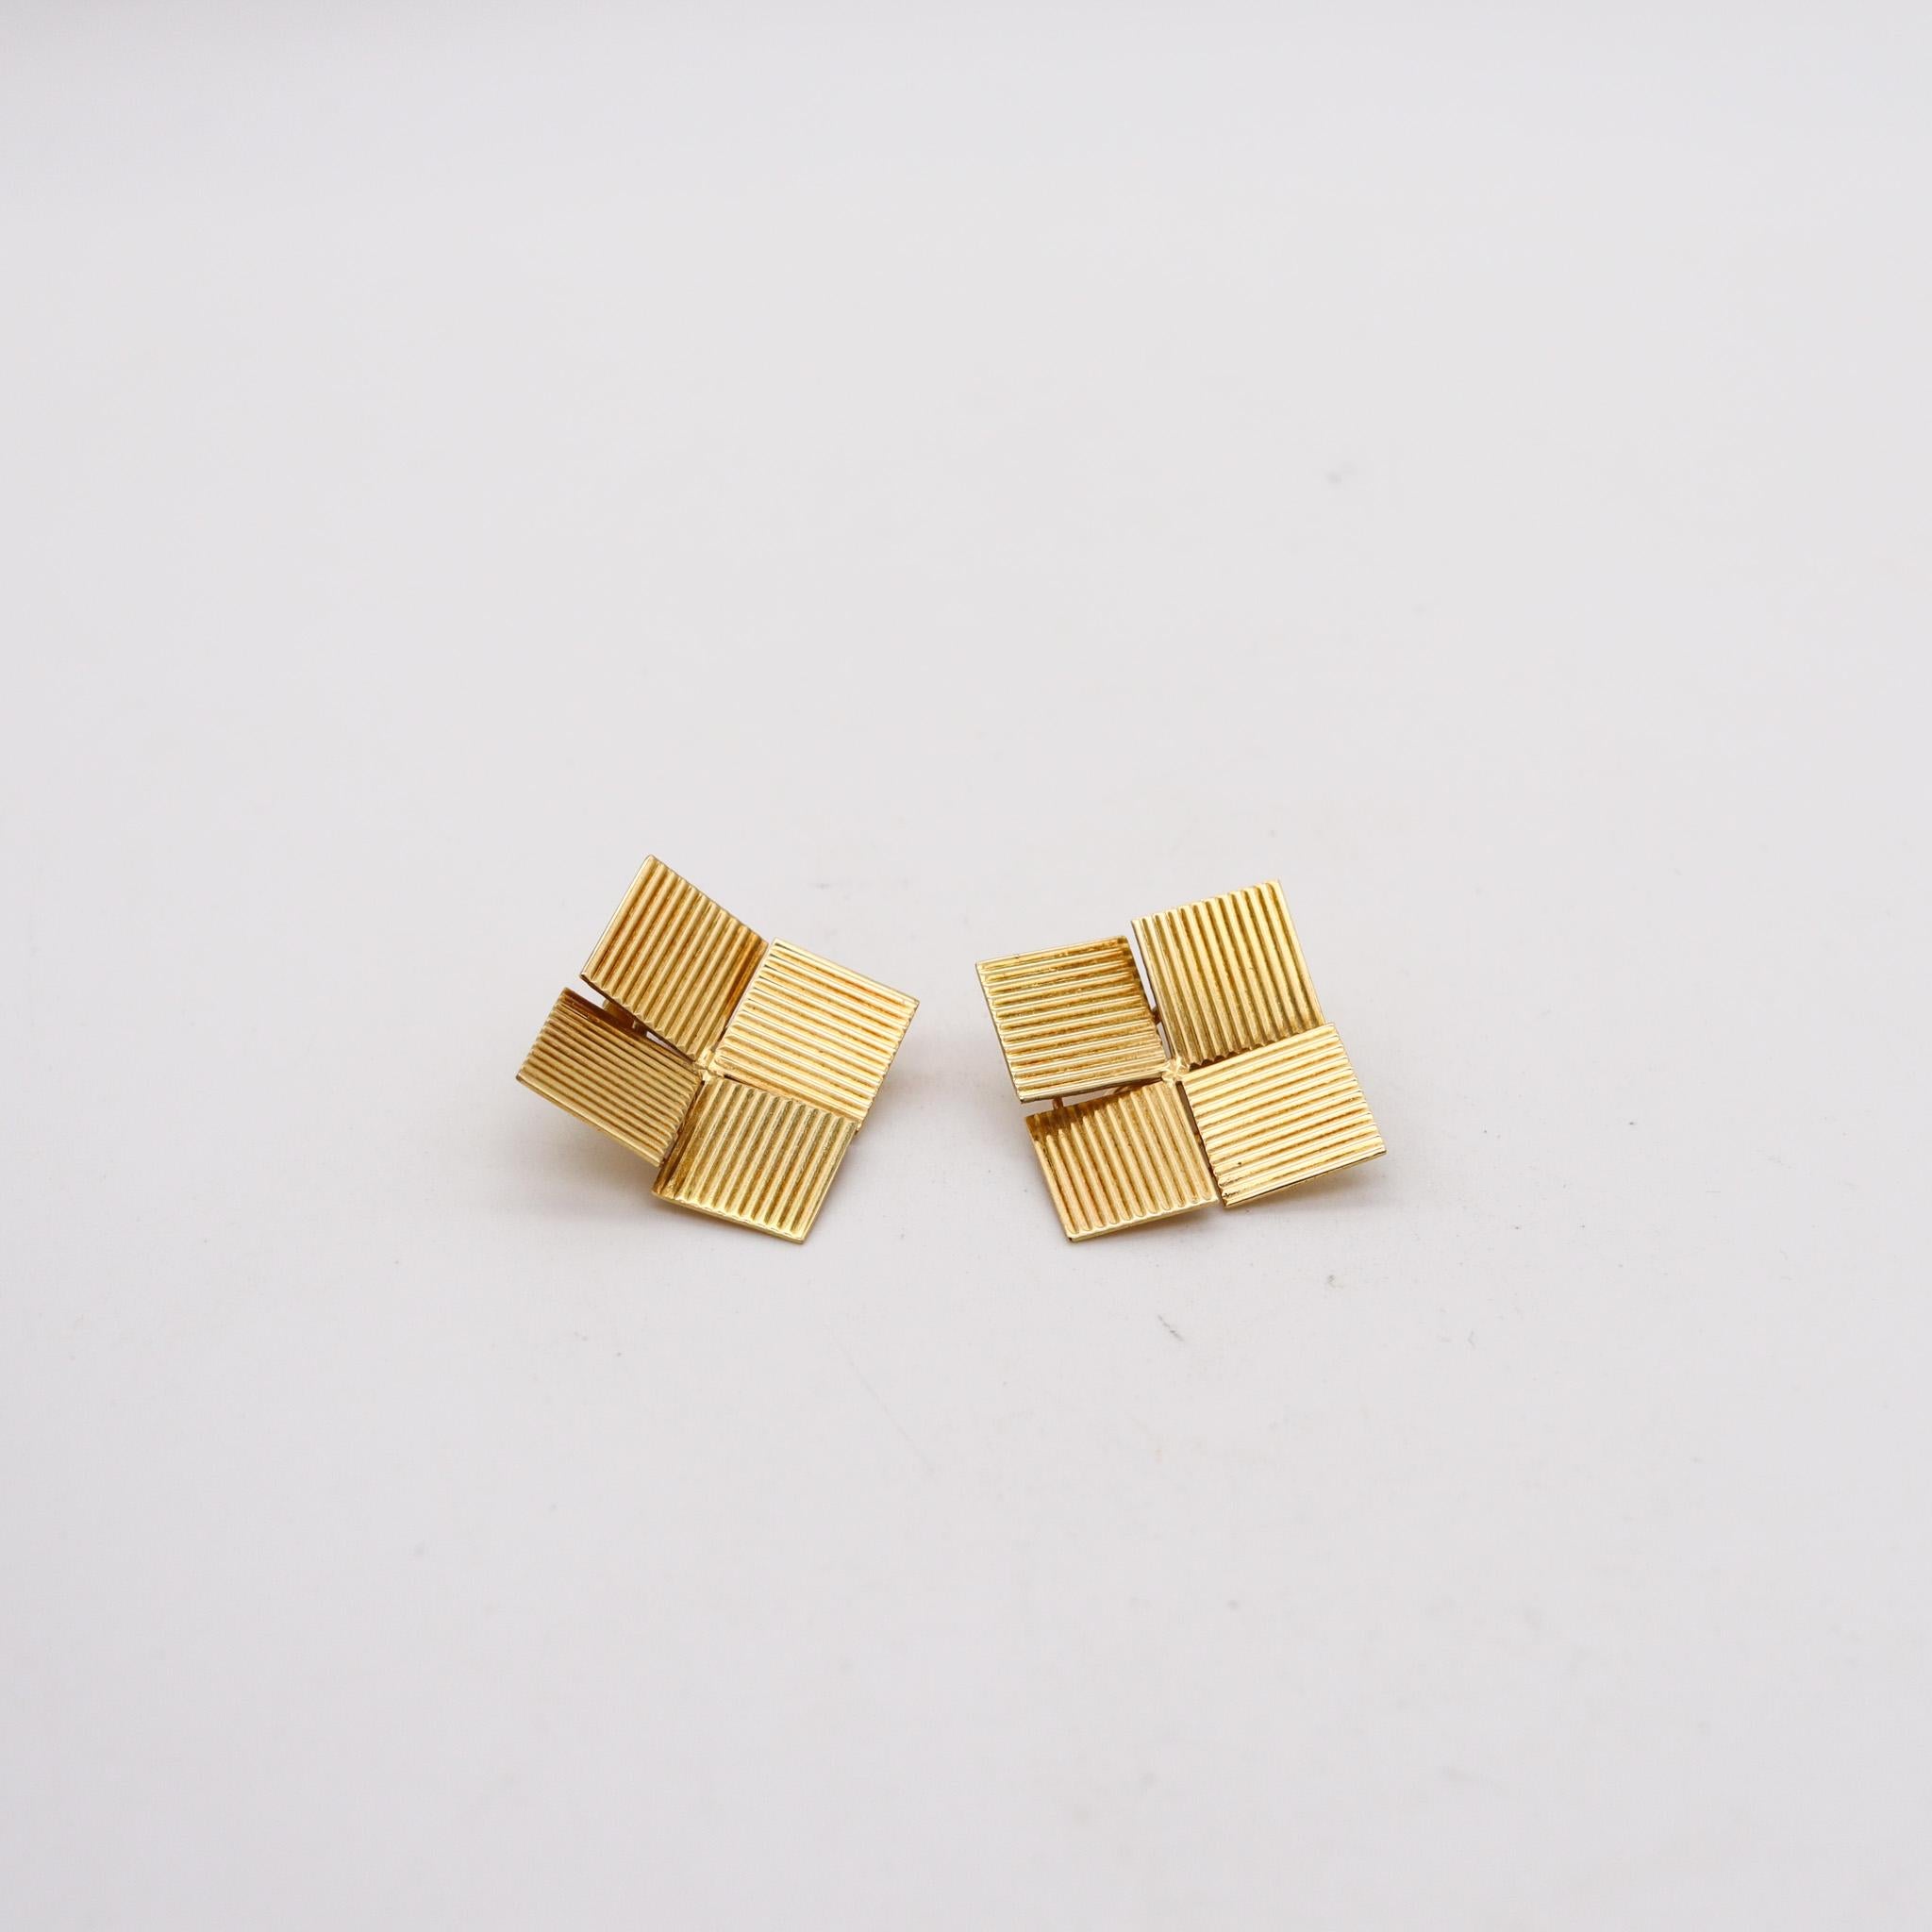 A modernist geometric squares earrings

A pair of geometric clips-on earrings, created in Italy back in the 1970. These earrings are very unusual and has been crafted with modernist patterns in solid yellow gold of 18 karats with high polished